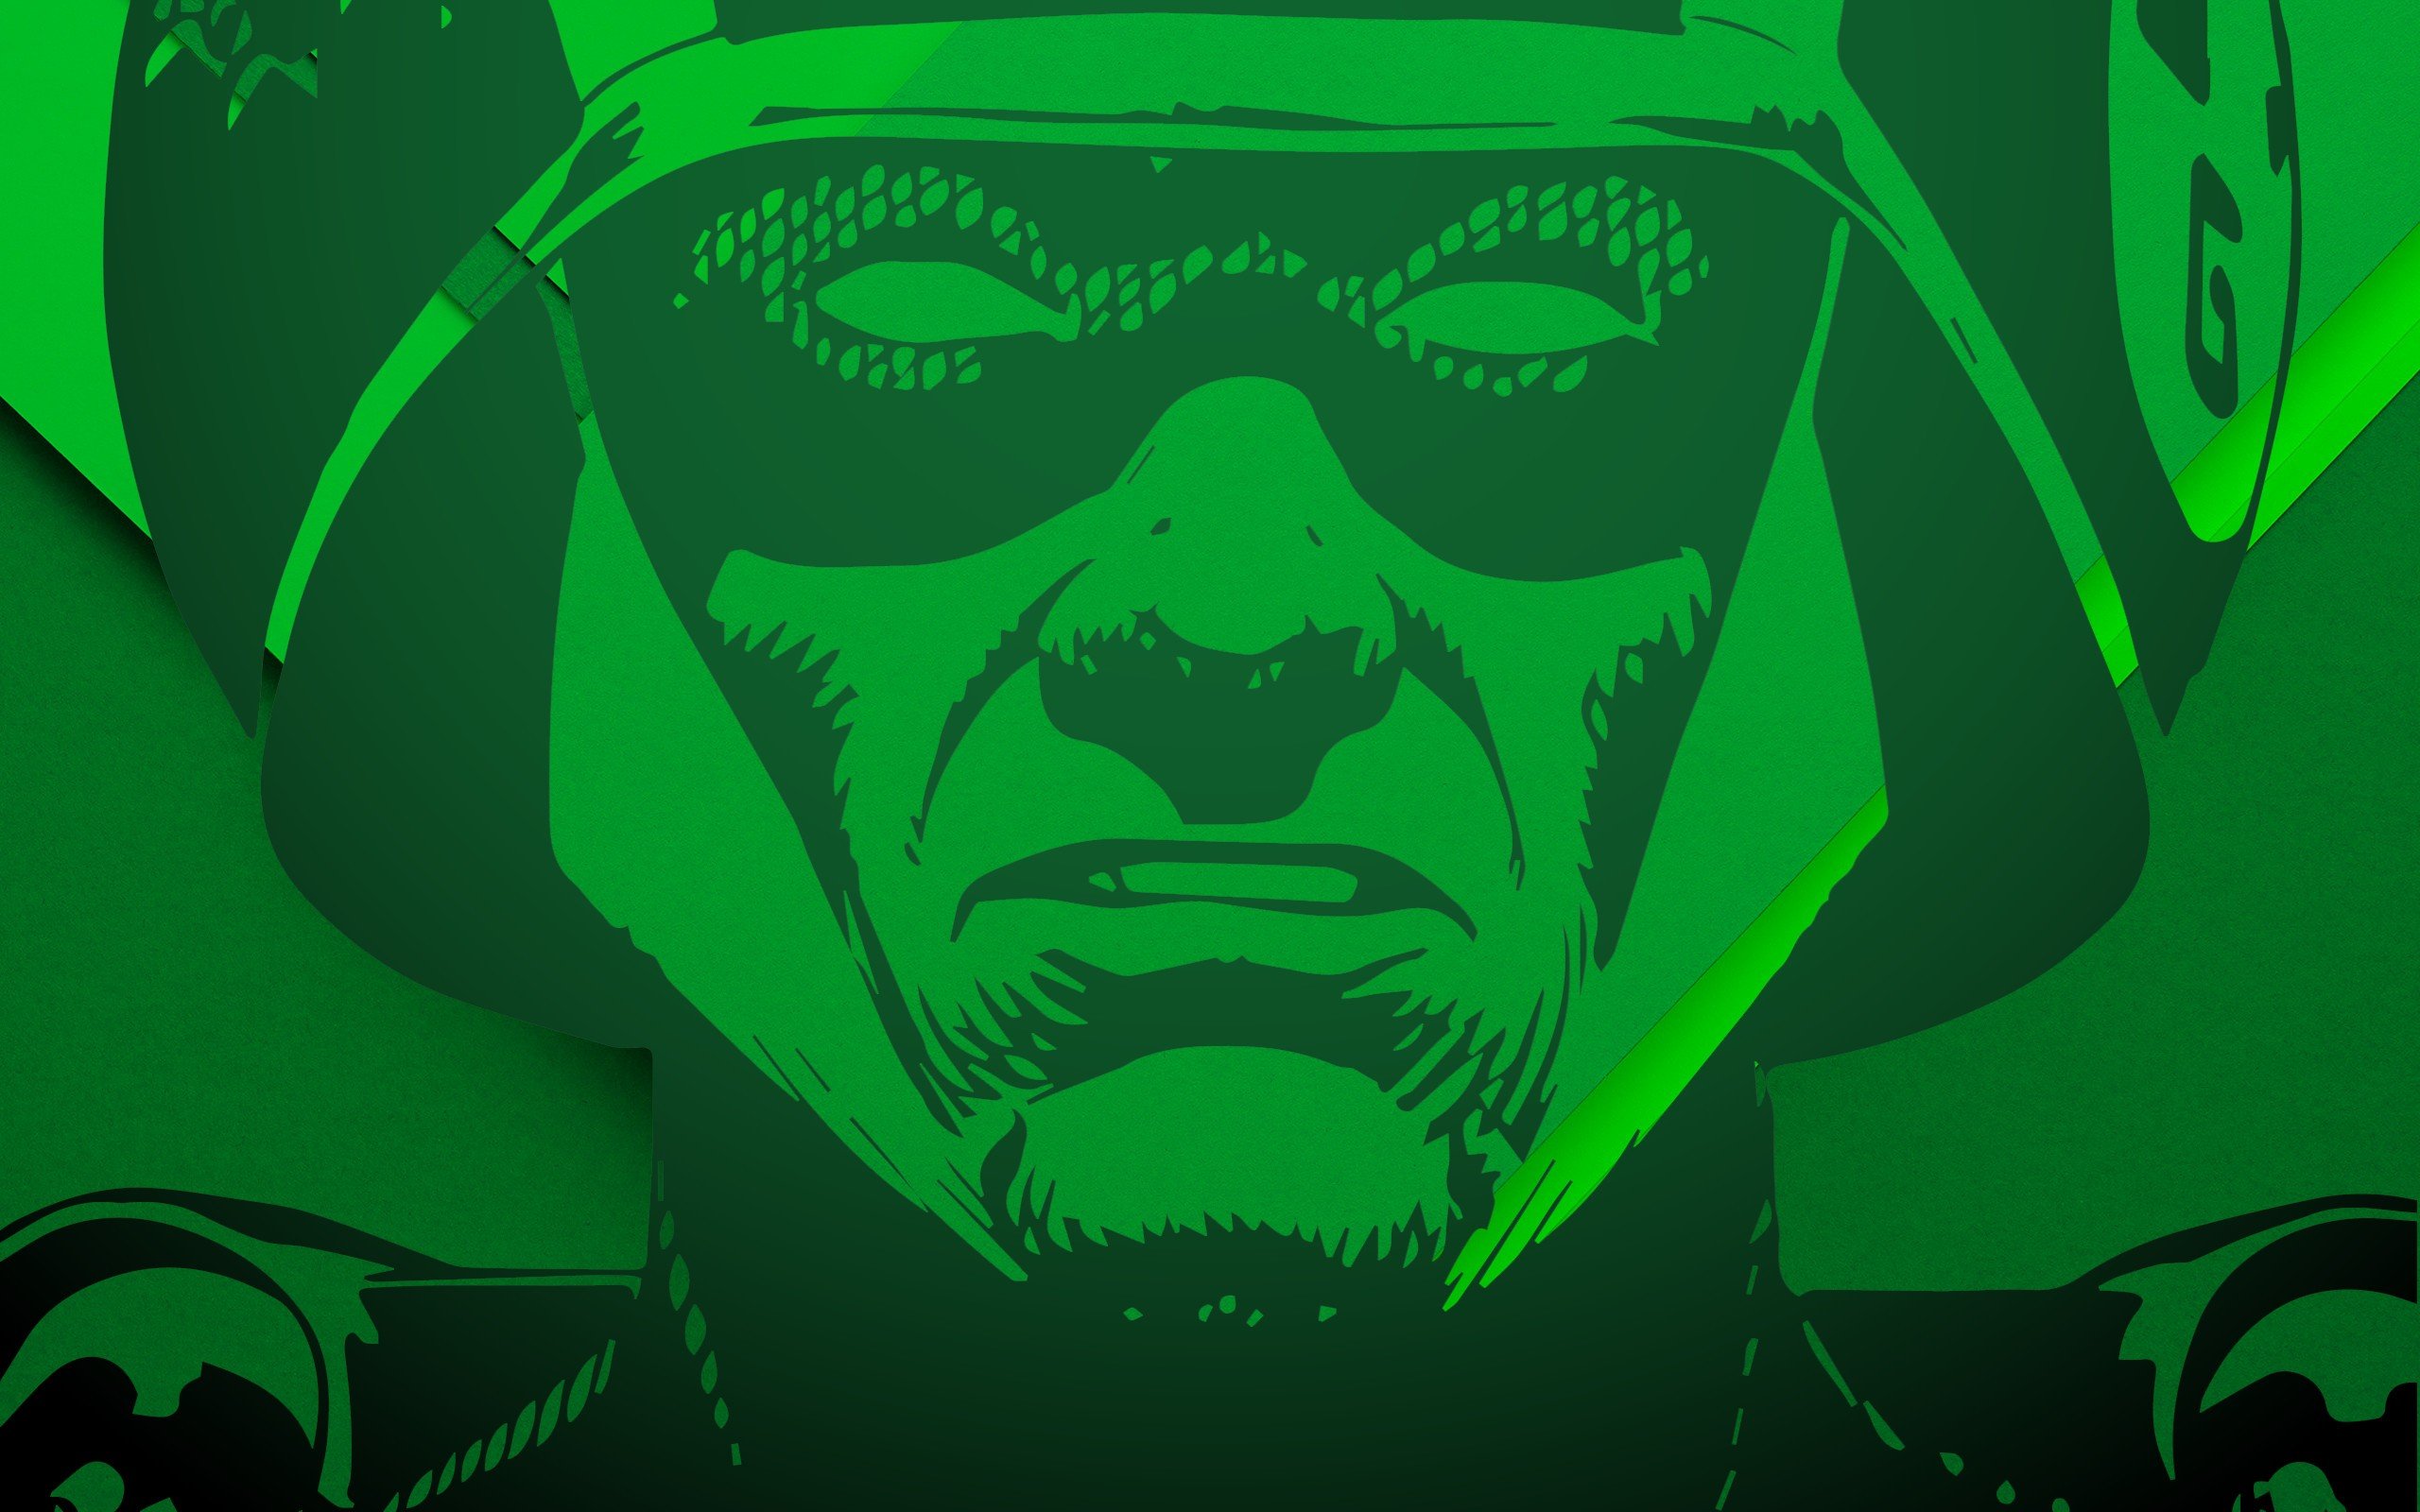 2000 AD, Rogue Trooper, Green, Camouflage, Illustration Wallpaper